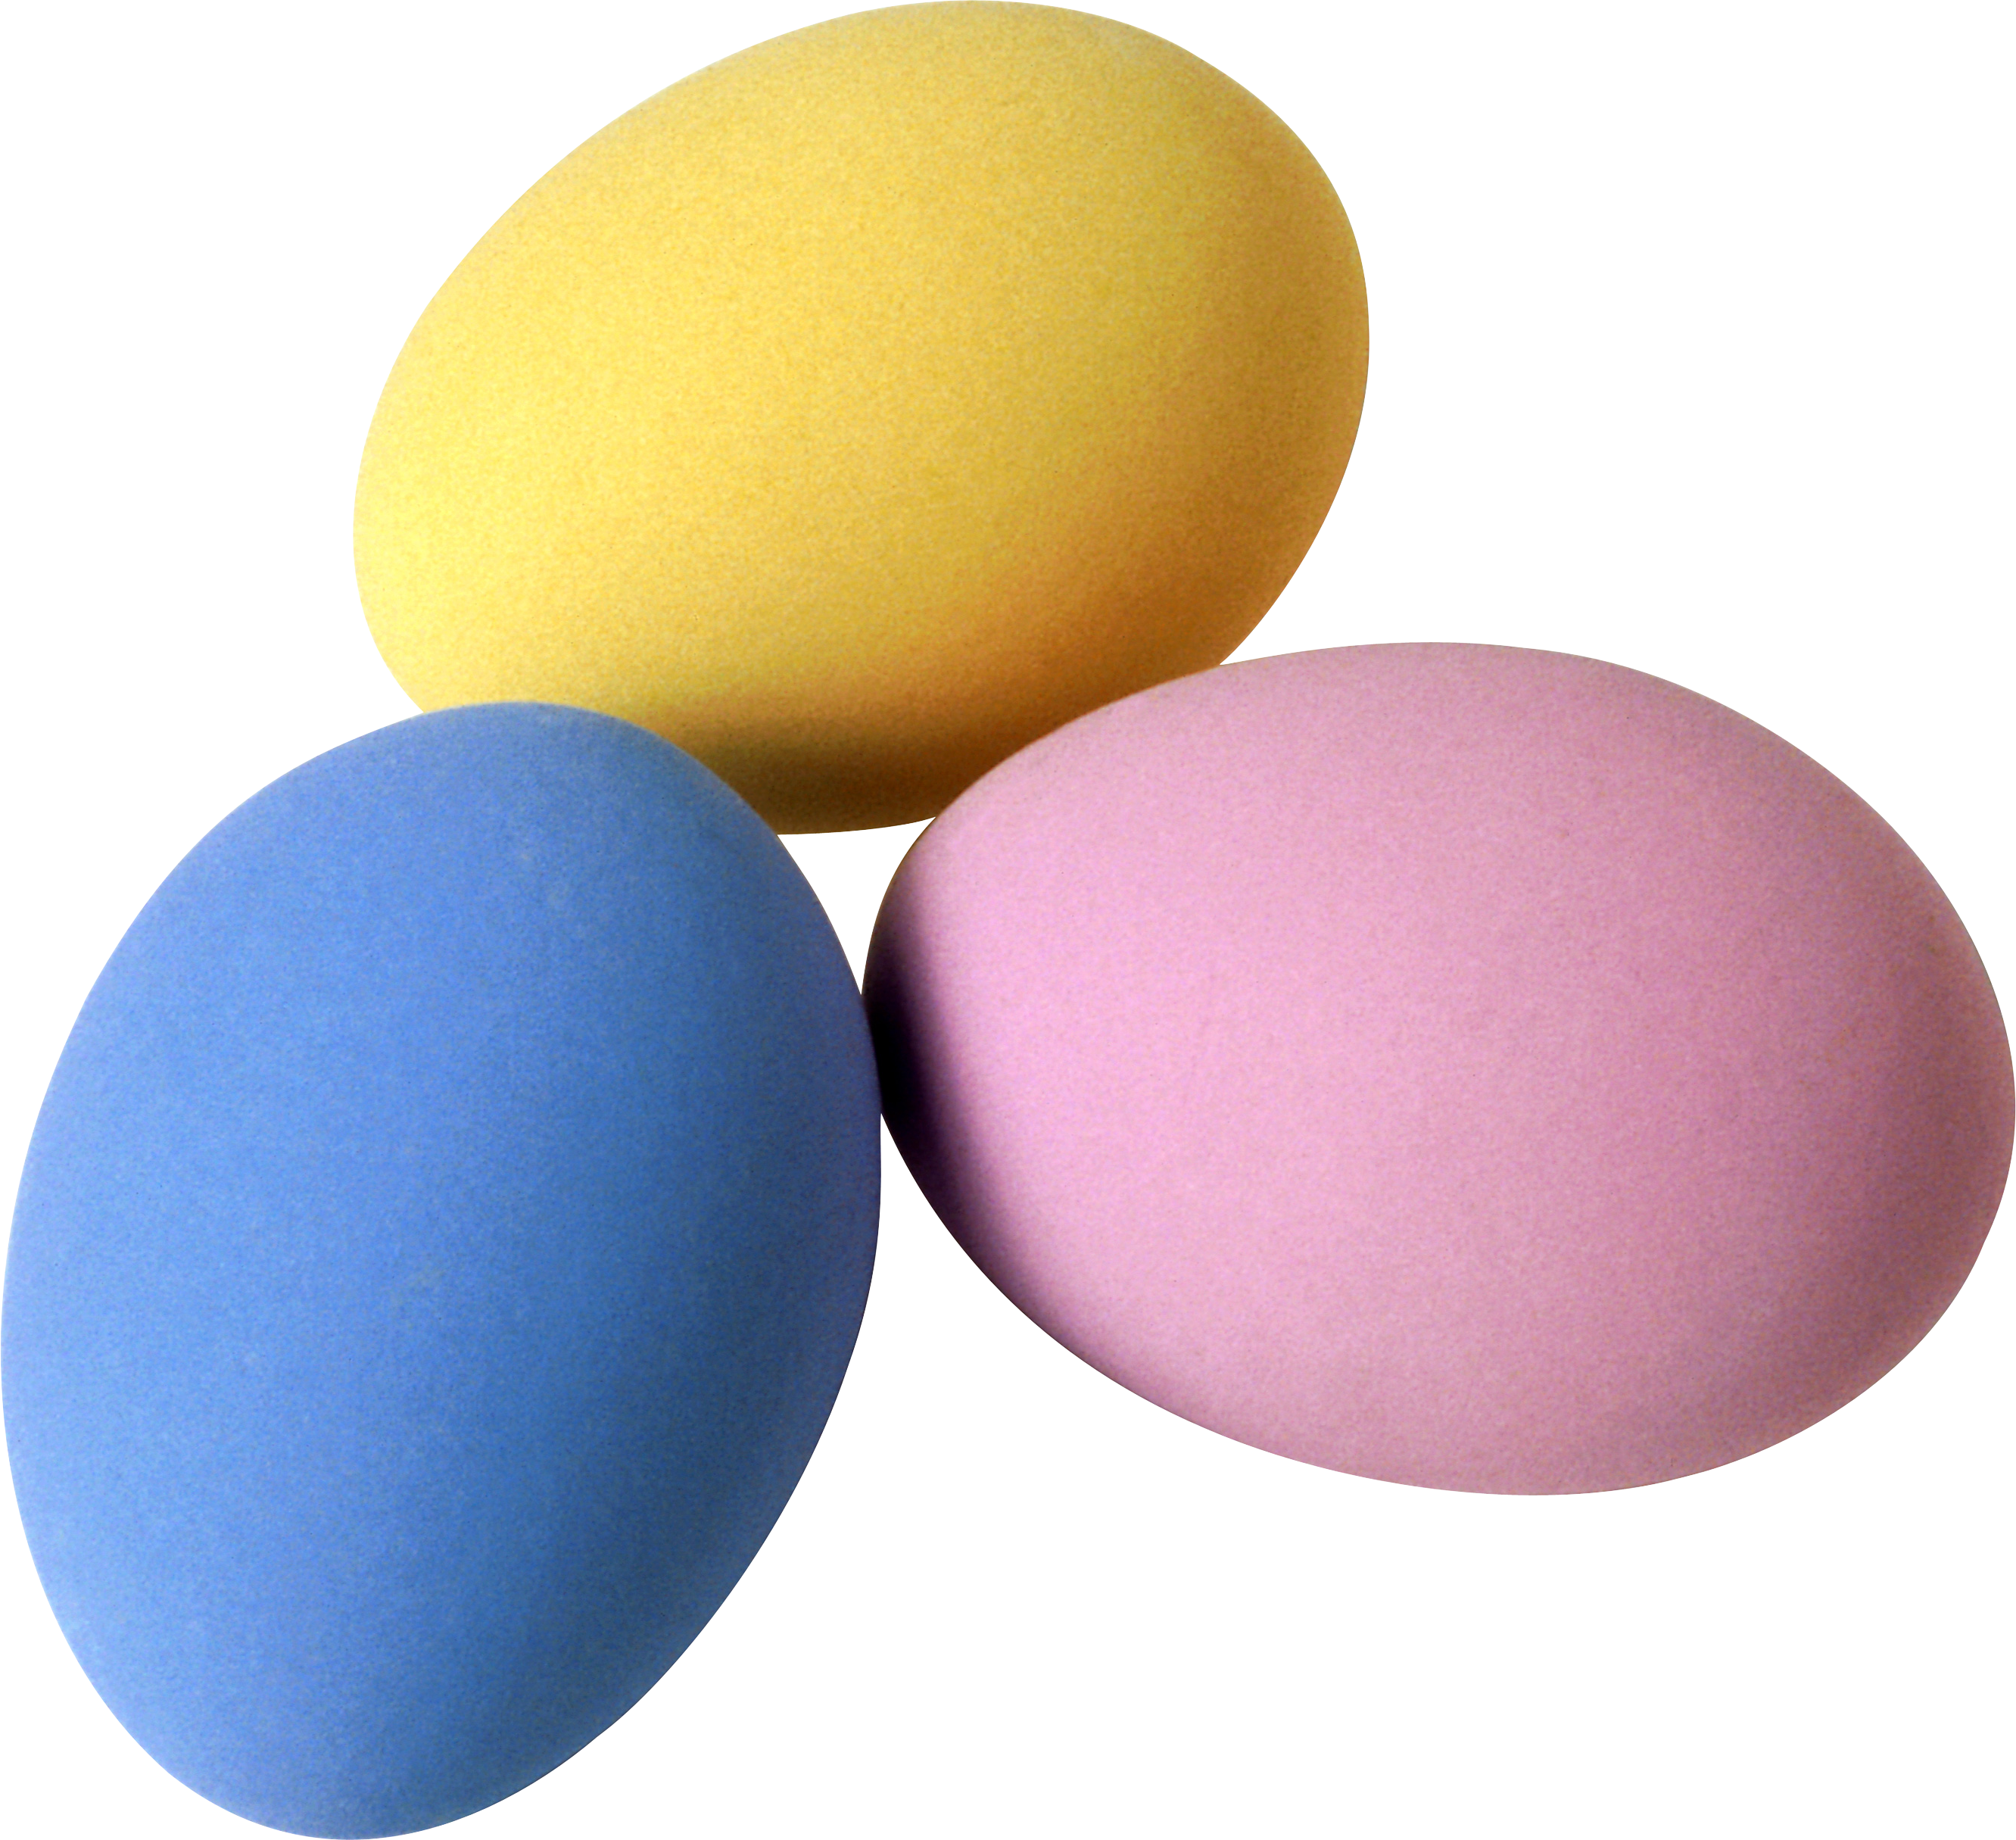 Eggs Png Image Free Download Png Pictures Of Eggs Easter - Eggs Png Image Free Download Png Pictures Of Eggs Easter (2663x2430)